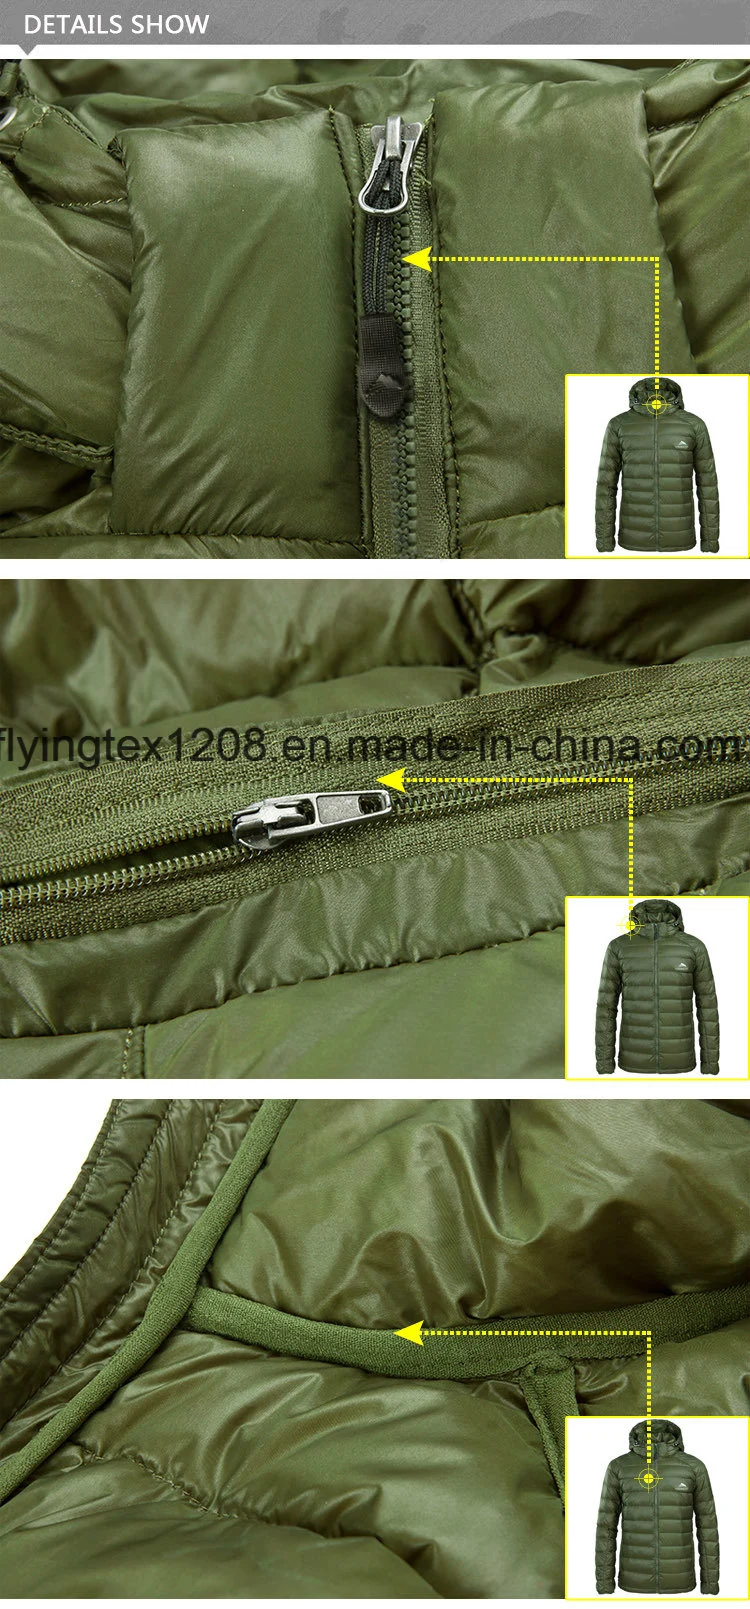 Water Resistant Windstoper Outwear Clothes Warm Coats Sports Down Jacket